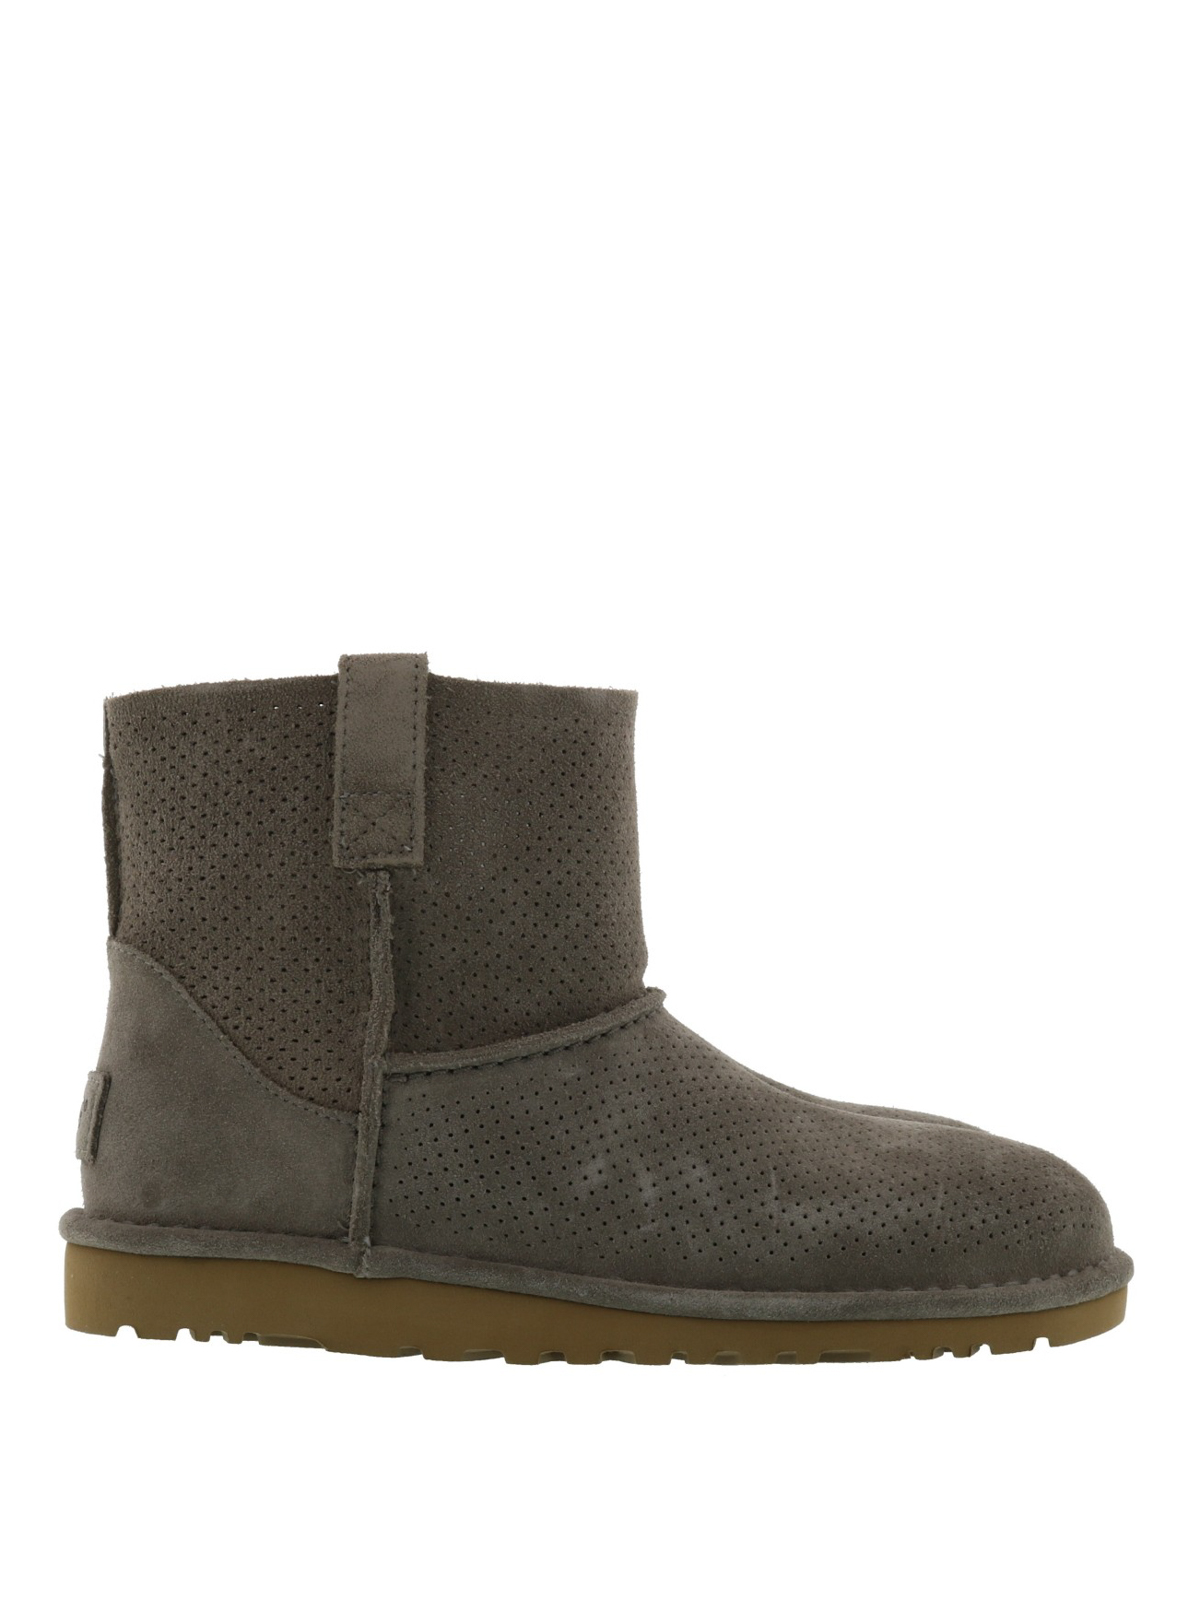 Ugg - Mini Perf taupe suede ankle boots 